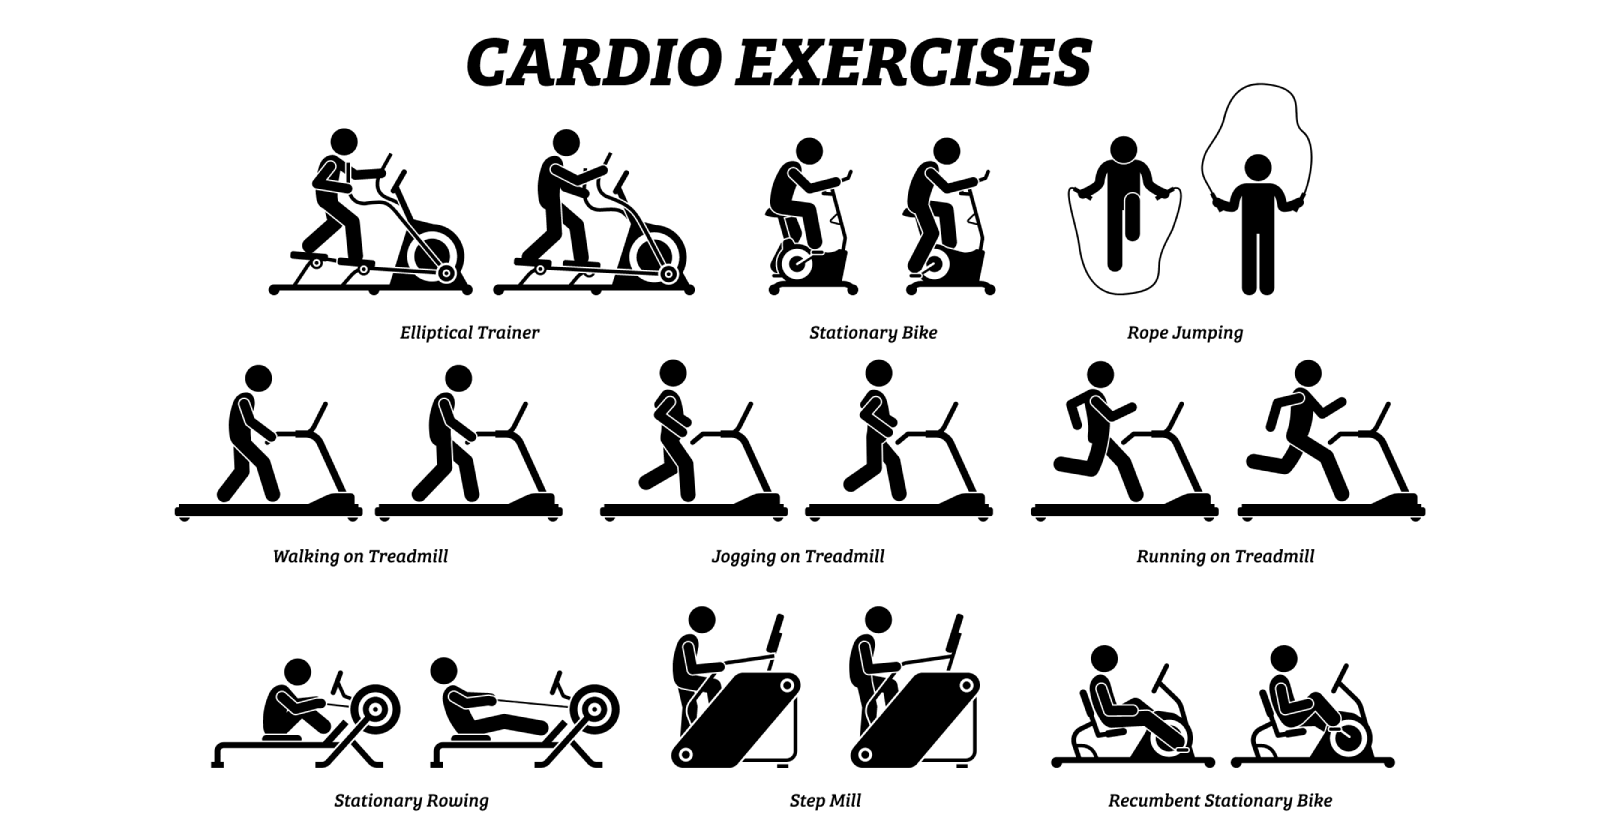 Cardiovascular Exercise - How to Do it Right